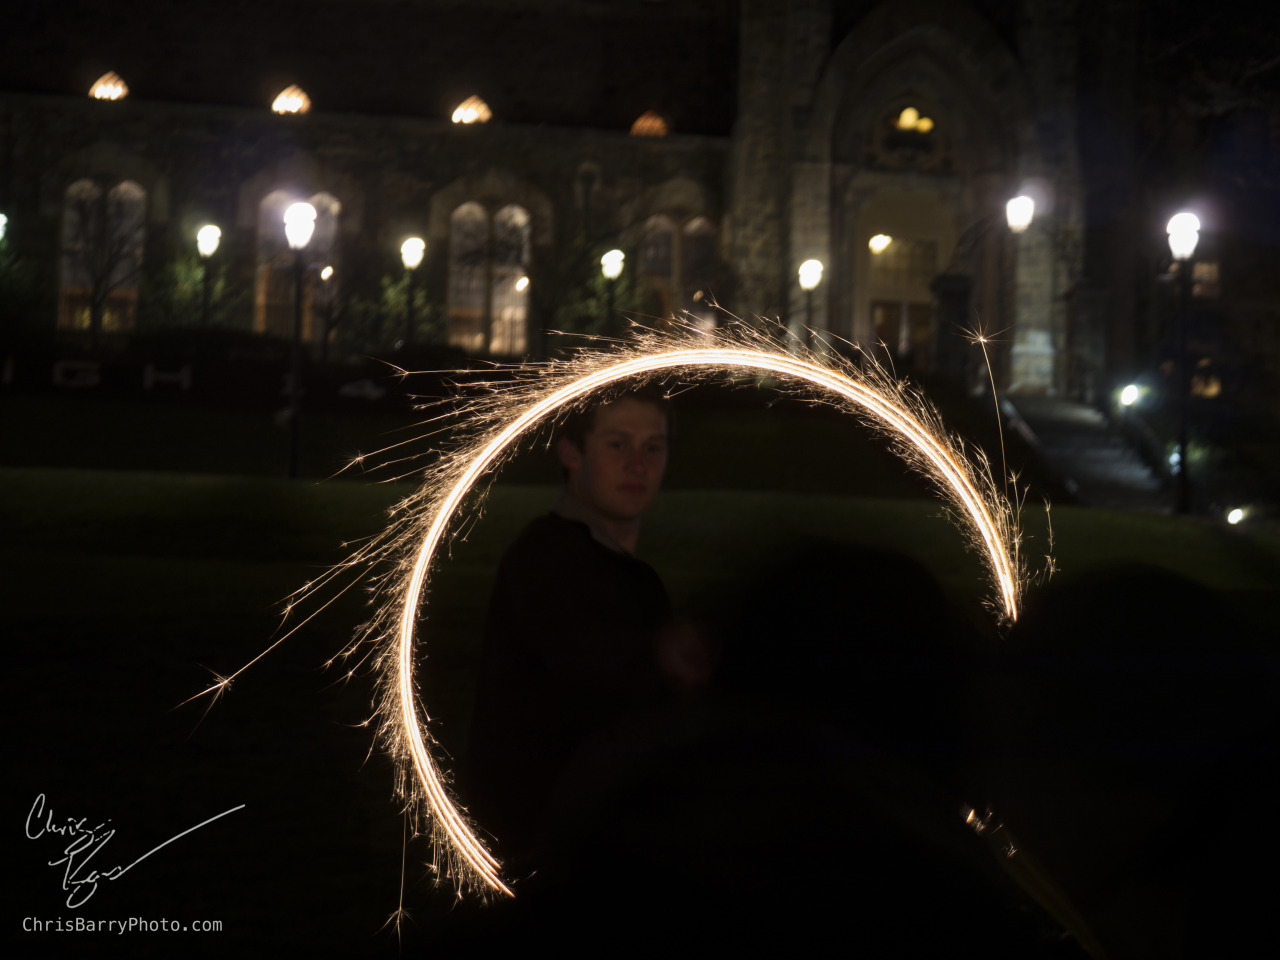 And one last sparkler picture